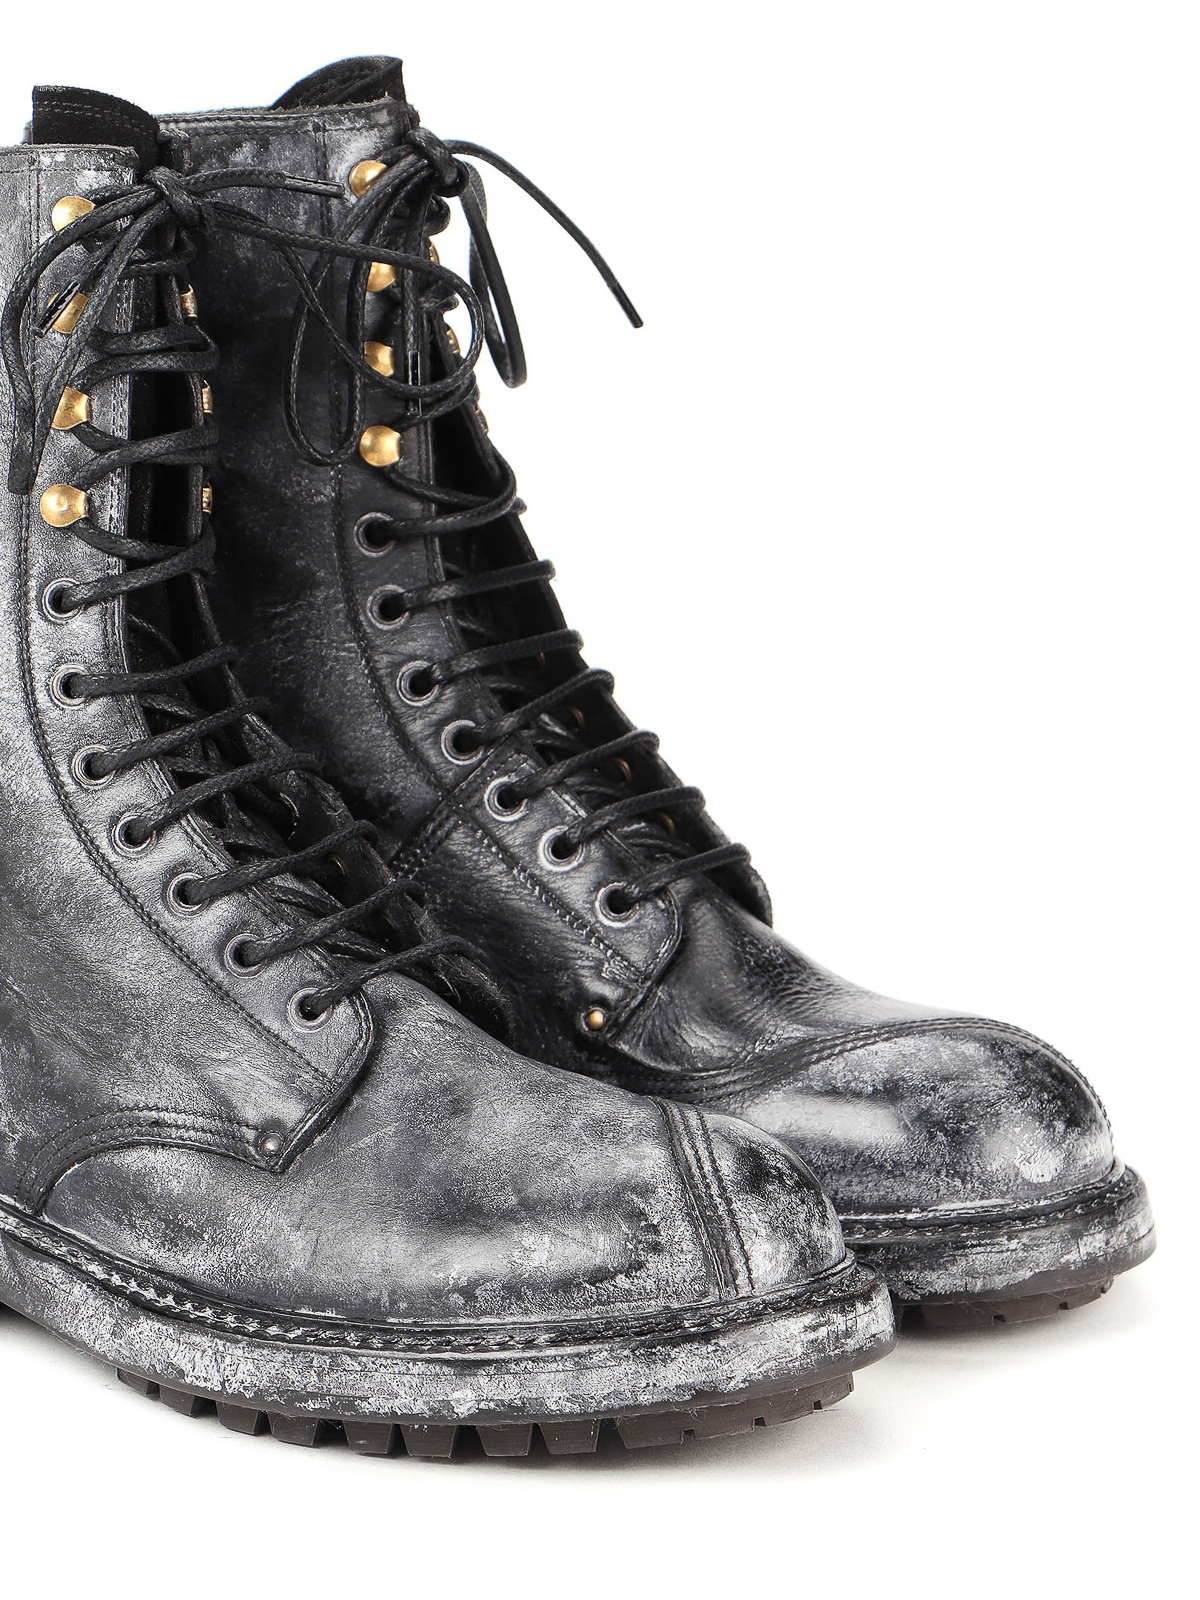 dolce and gabbana the only one boots